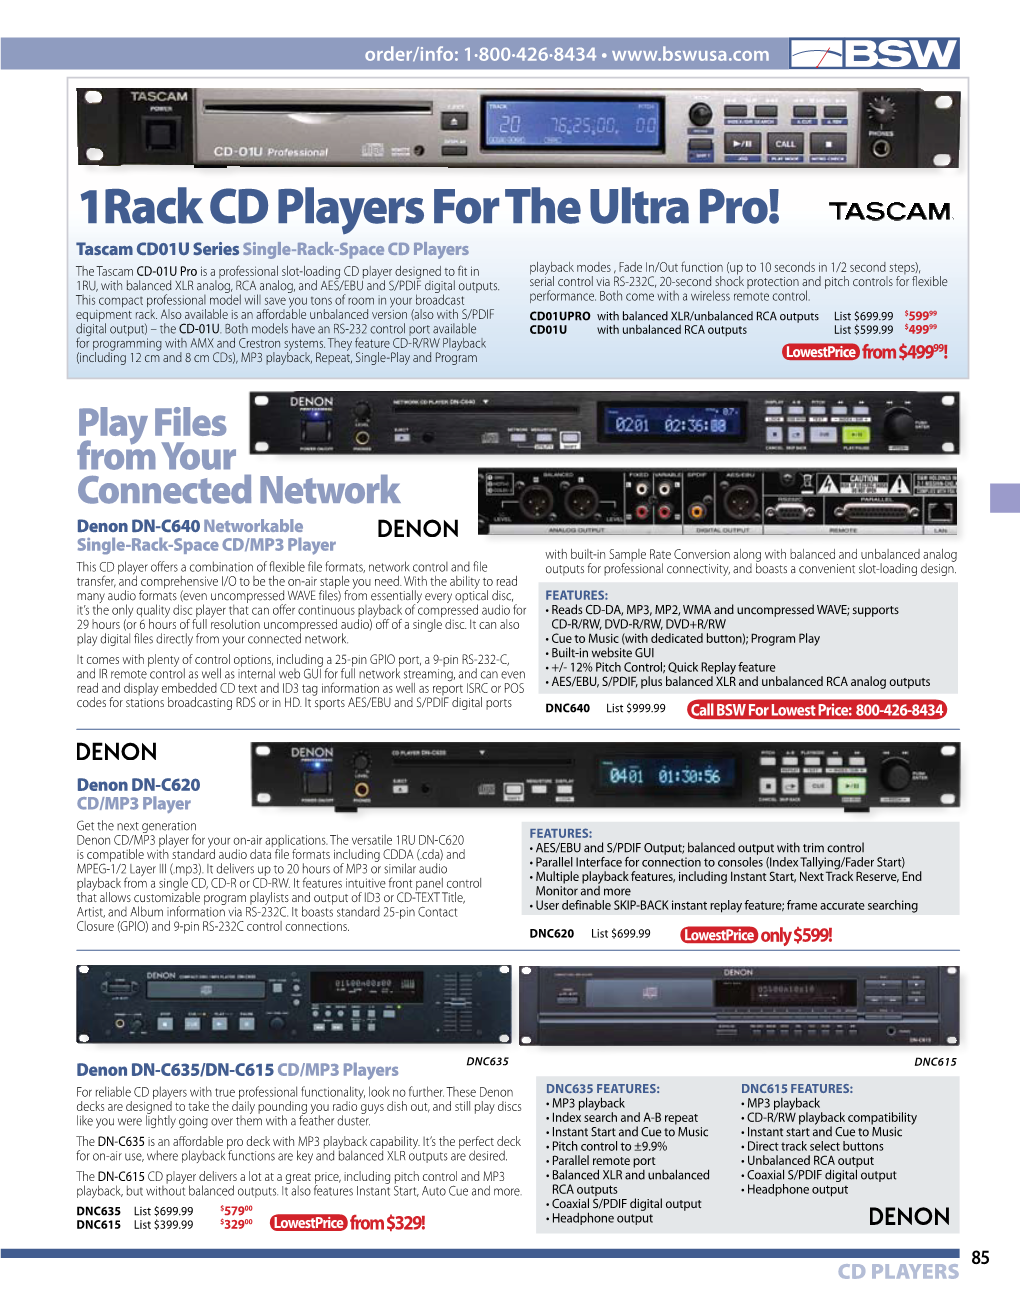 1Rack CD Players for the Ultra Pro!